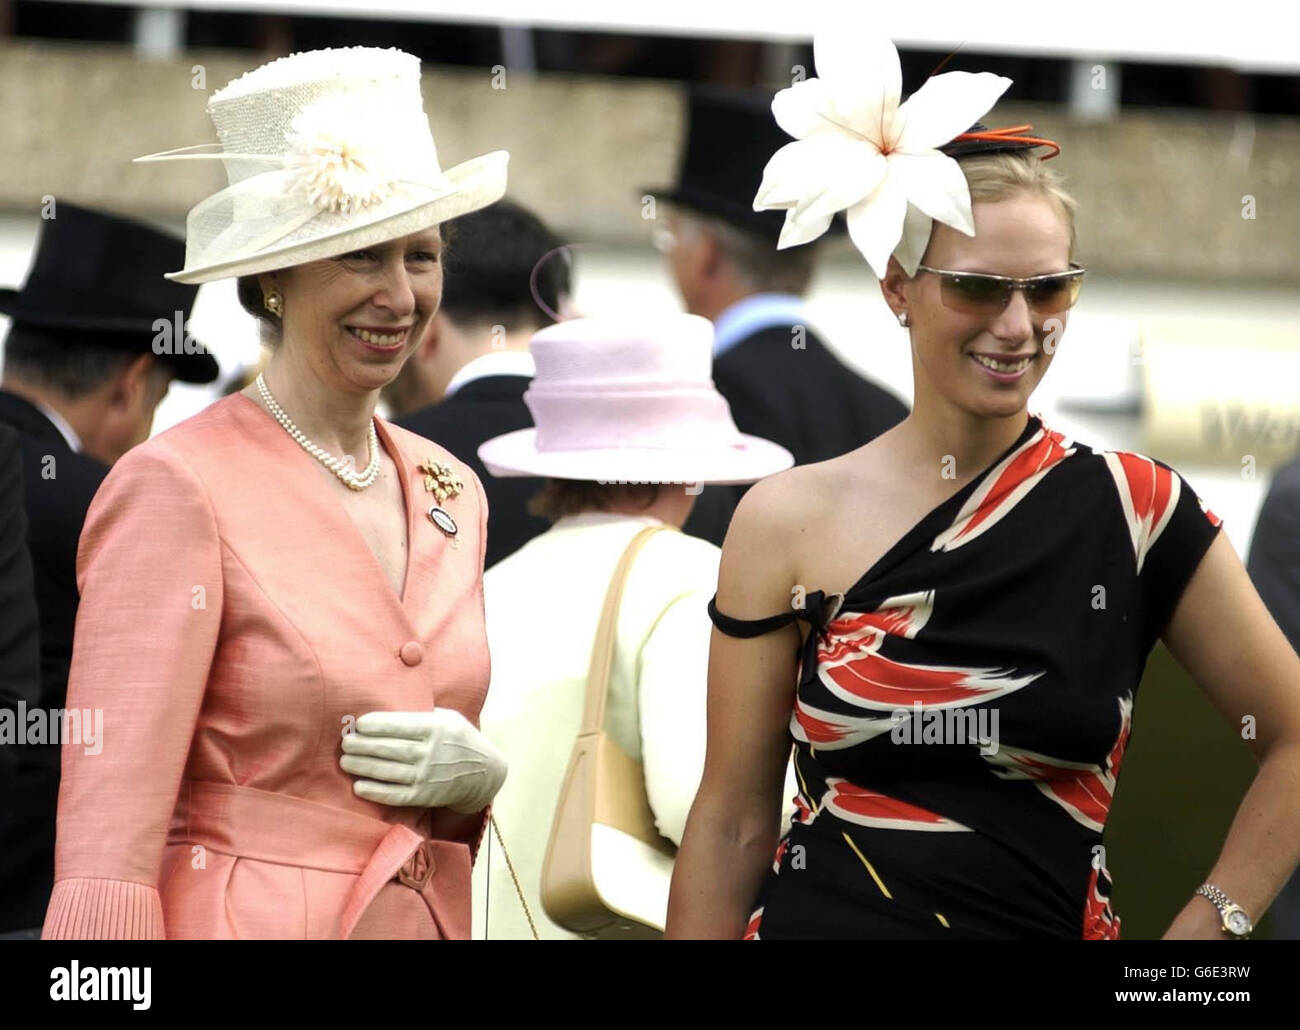 Zara Phillips stands next to her mother Princess Anne in the winner's  enclosure at Royal Ascot. Both Zara and the Princess Royal had watched the  Queen's horse Right Approach finish third in